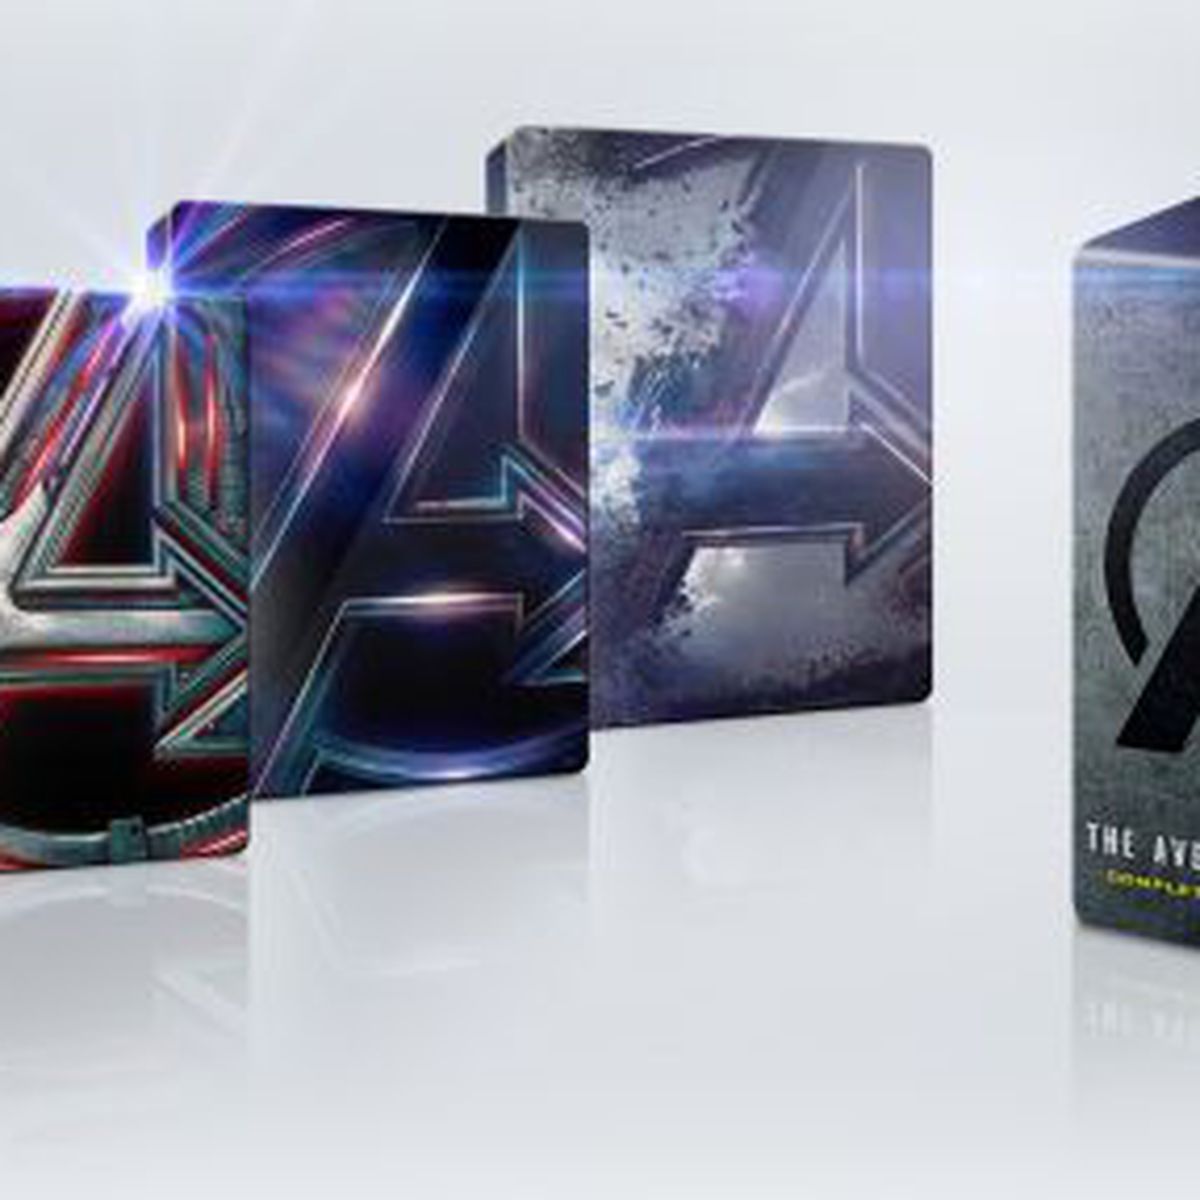 A product shot of the 4 film Avengers Blu-ray set